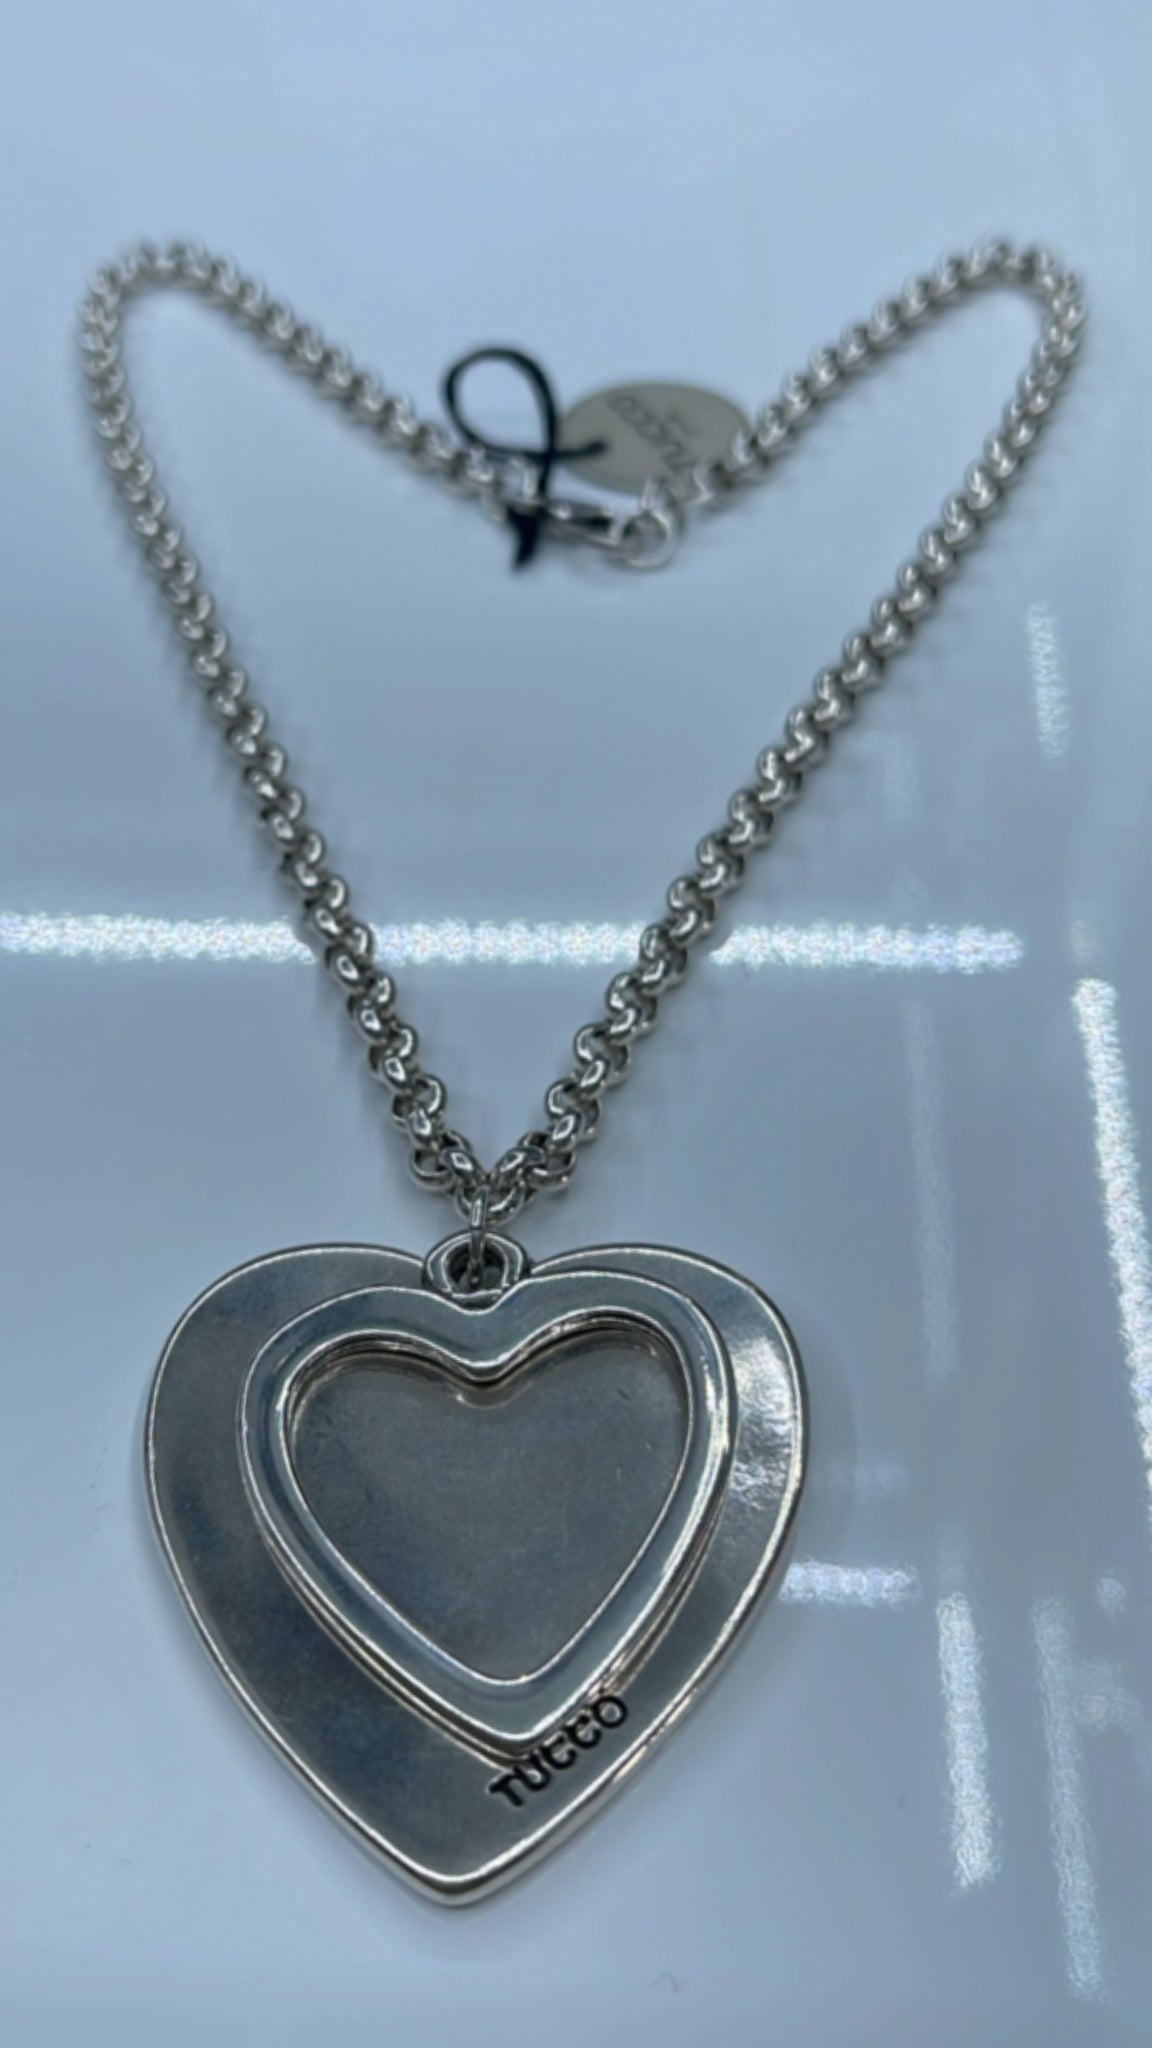 Tucco Heart Necklace